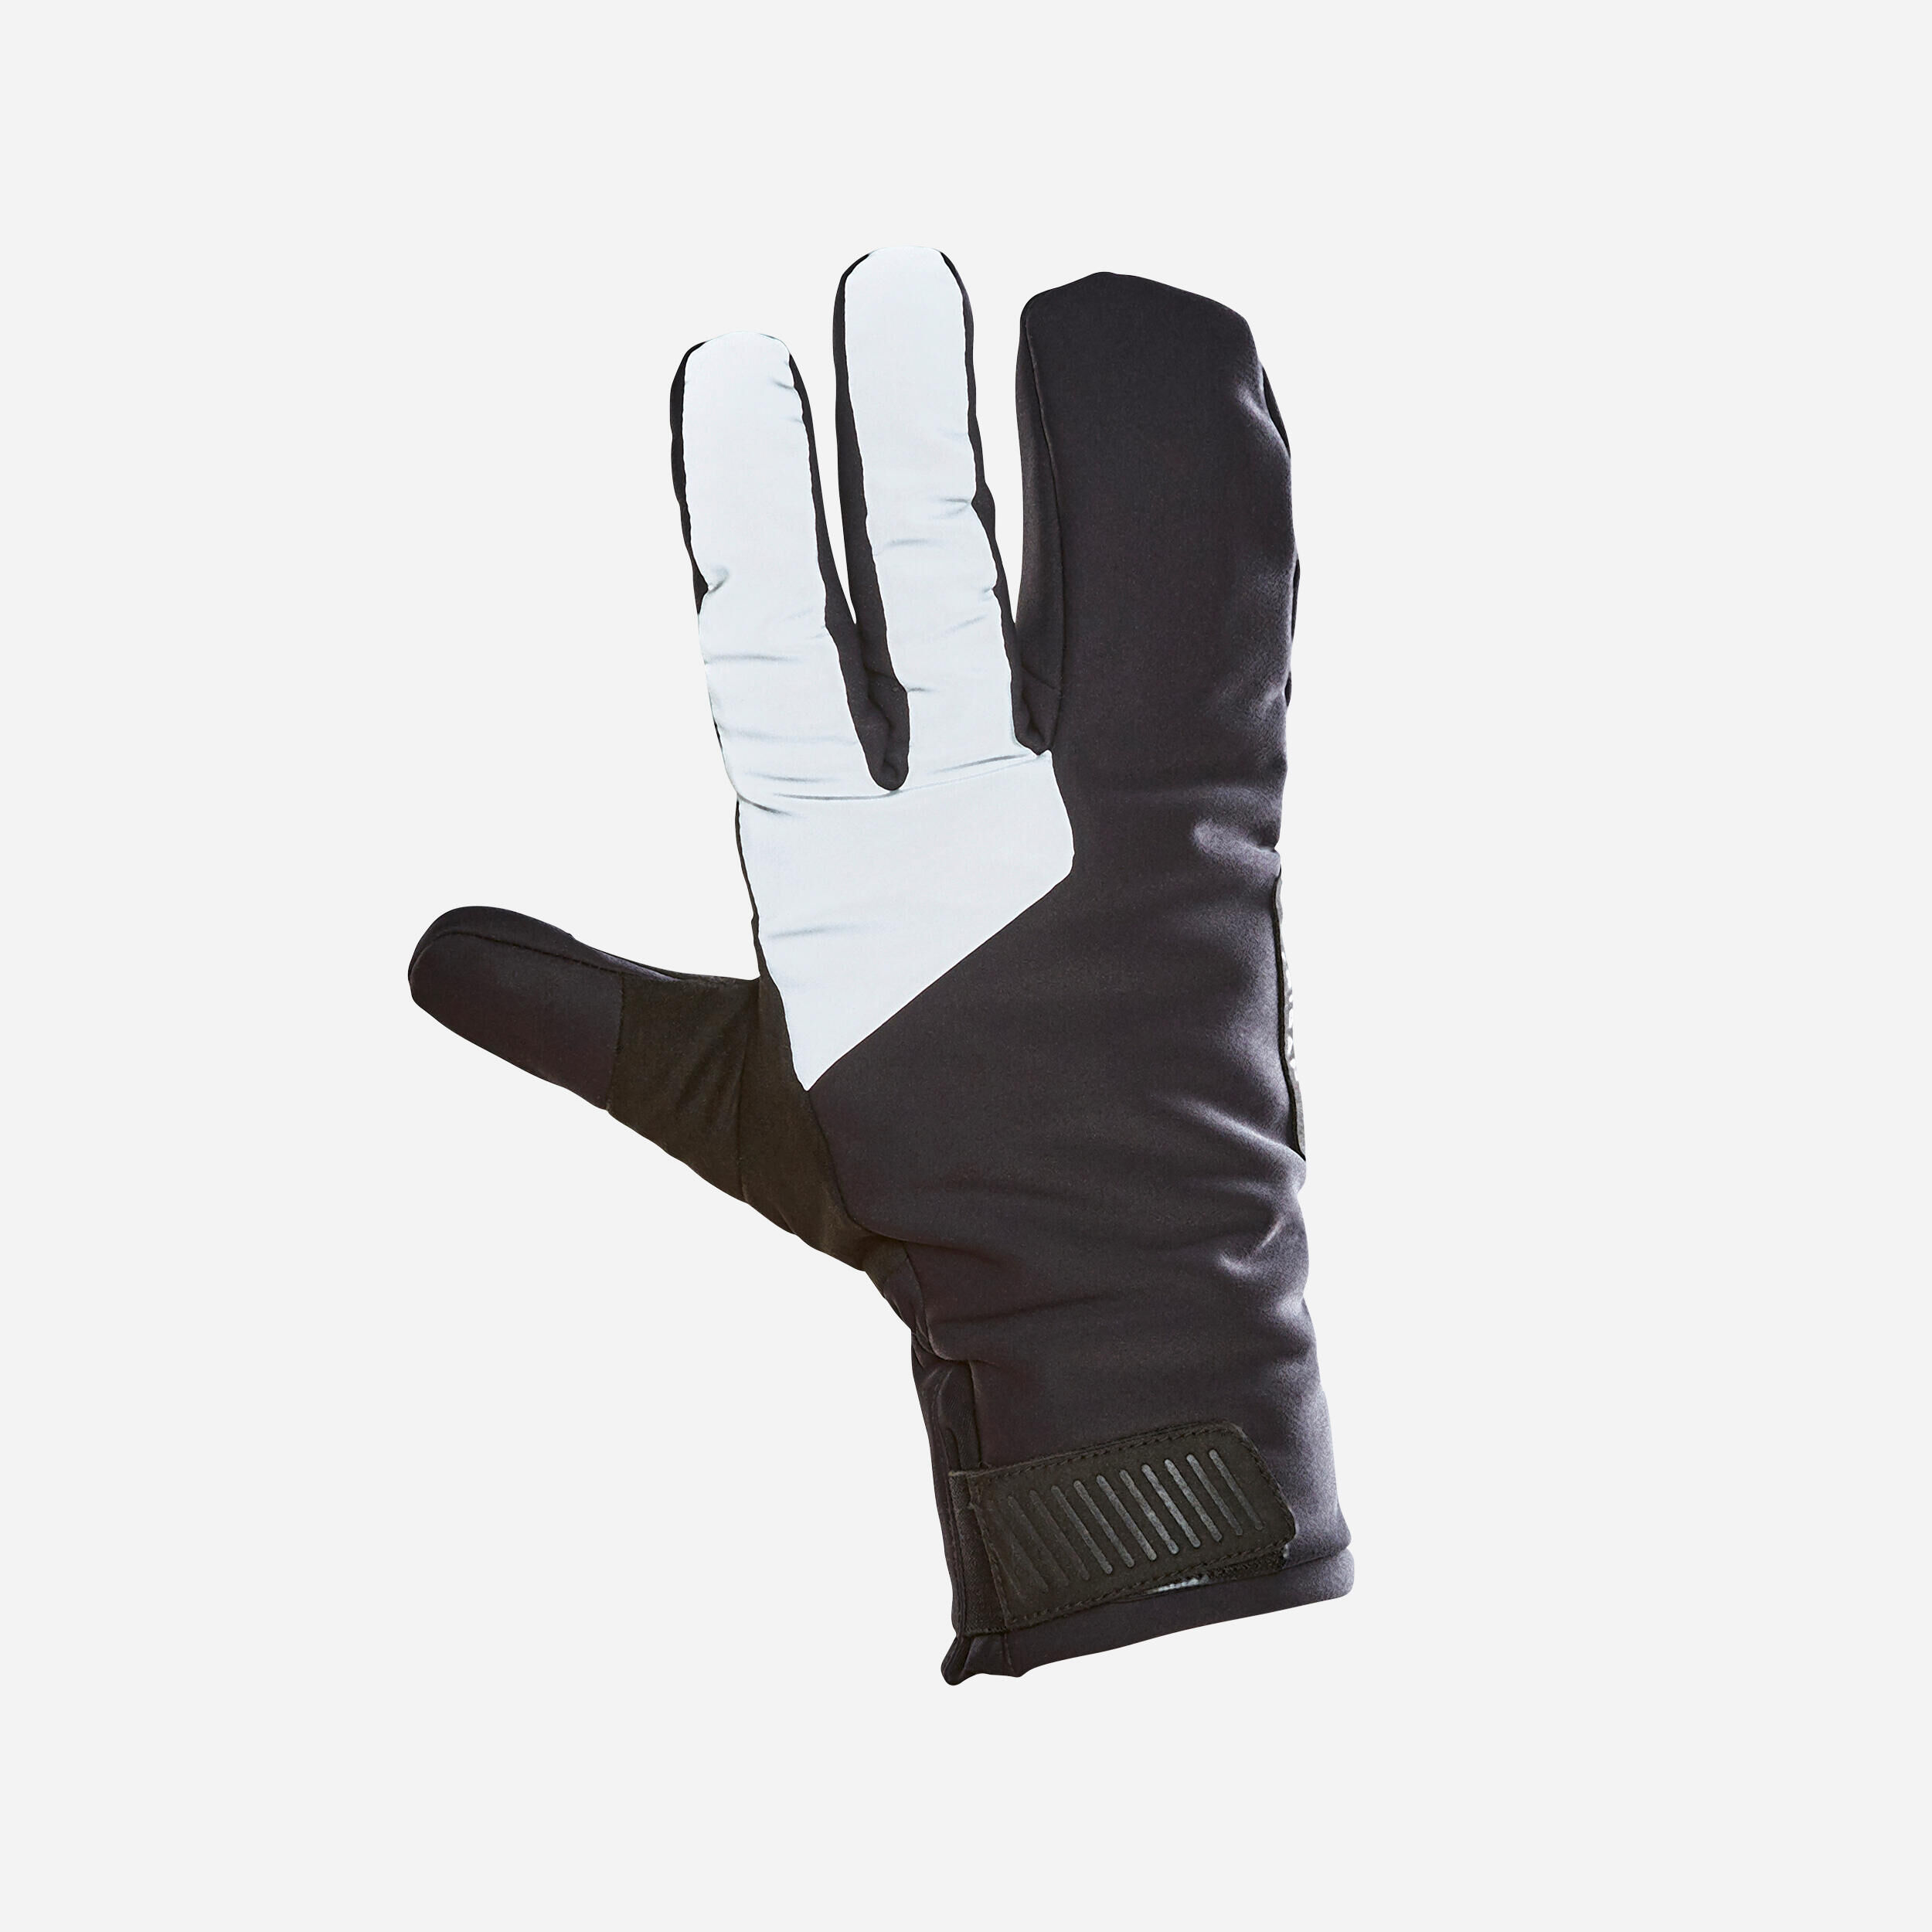 TRIBAN 920 Winter Cycling Gloves